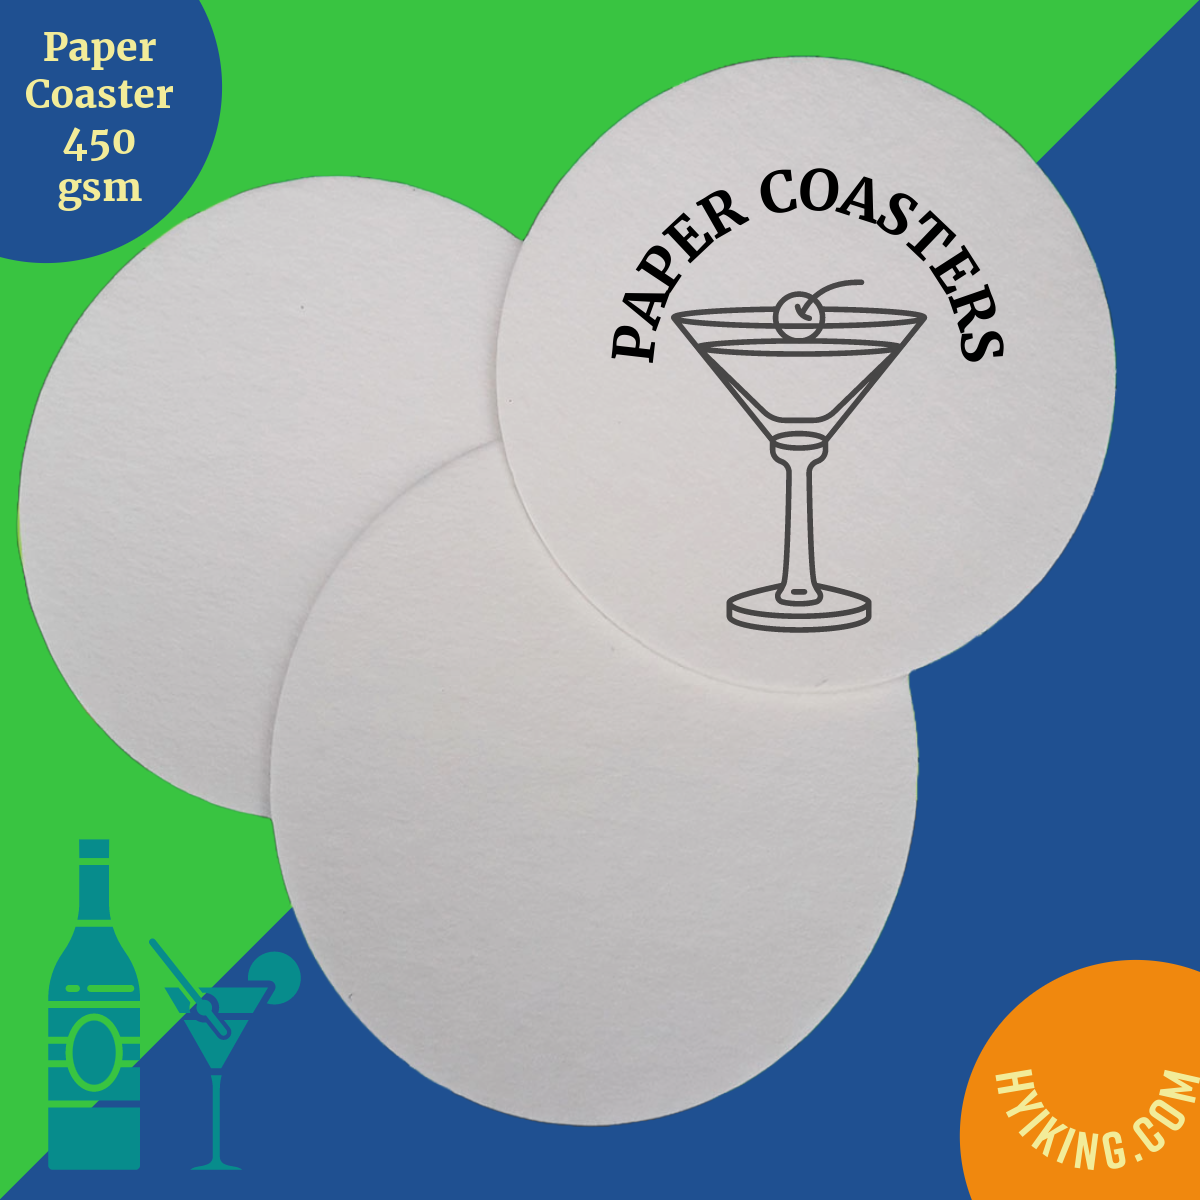 500 pieces of absorbent coasters made from 450 GSM paper, ideal for use in bars, restaurants, and pubs.